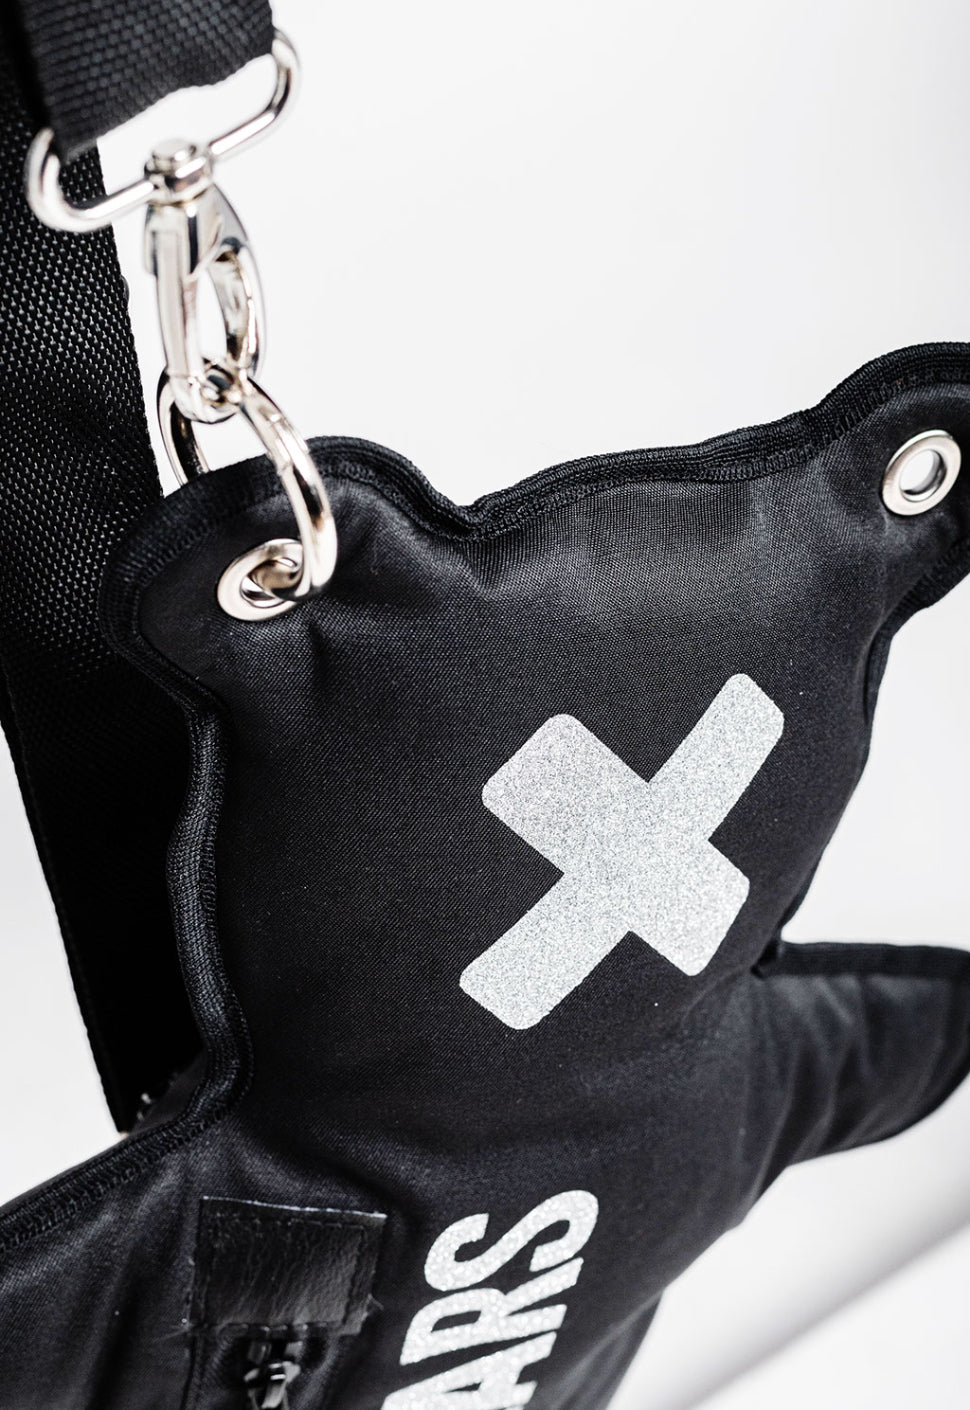 Handcrafted unisex black bear-shaped bag with silver glitter print and high-quality hardware